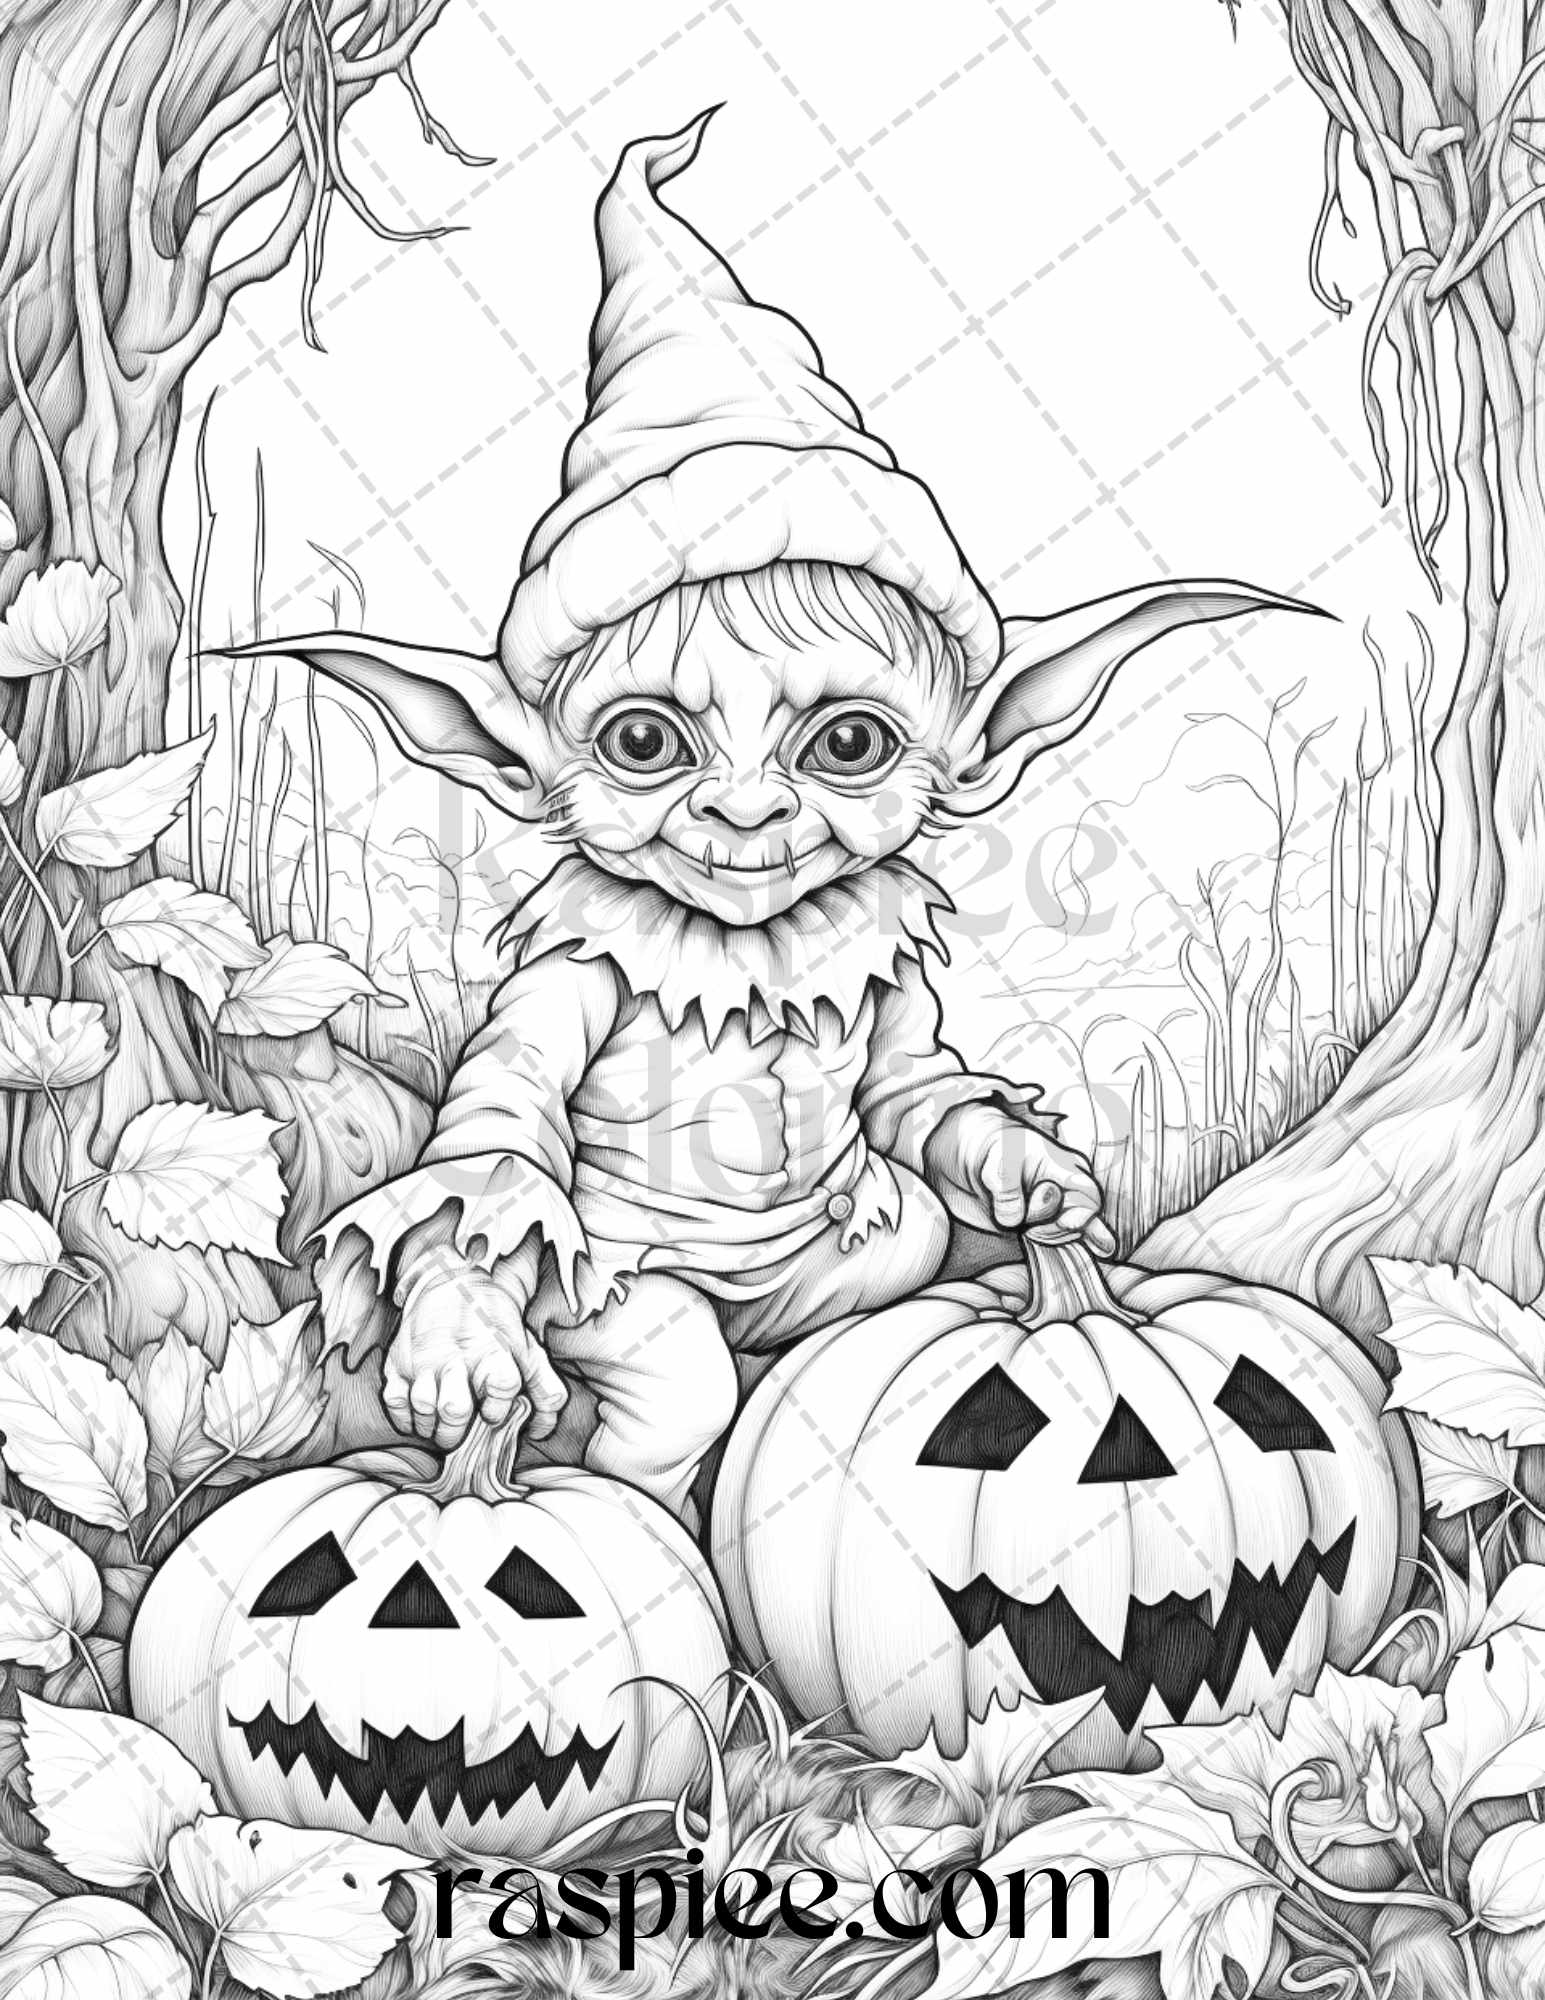 Halloween Goblin Coloring Page, Adult Grayscale Coloring Printable, Spooky Goblin Art Sheet, Halloween Coloring Book Page, Printable Halloween Decor, Stress Relief Coloring, DIY Halloween Craft, Detailed Goblin Drawing, Creepy Halloween Art, Halloween Grayscale Coloring Pages